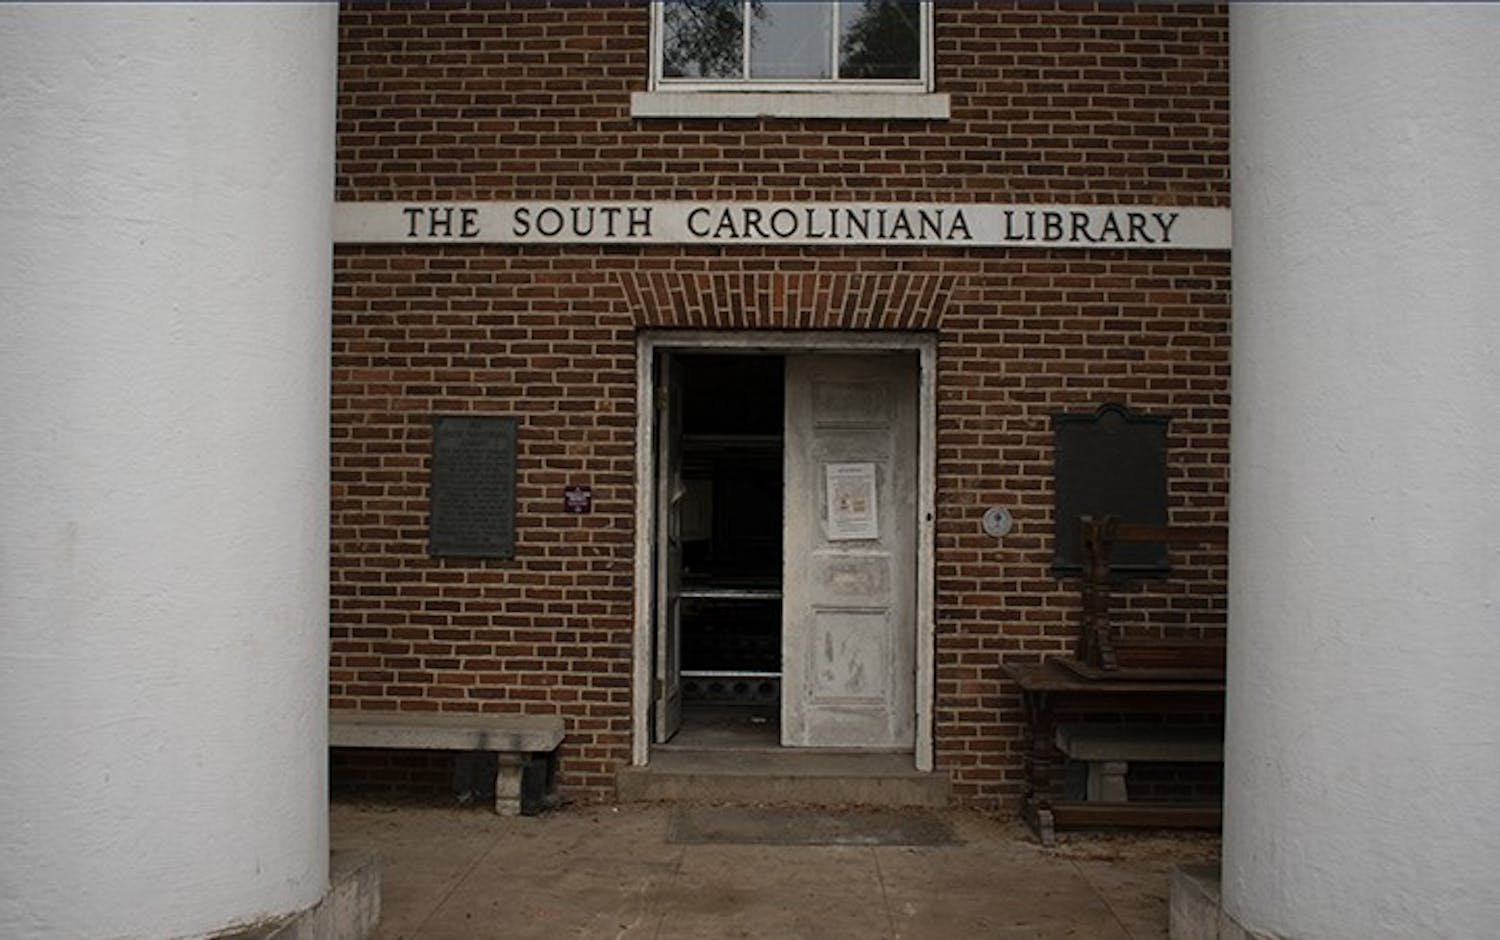 The South Caroliniana Library located on the Horseshoe is currently undergoing construction. The library is often used as a place for research.